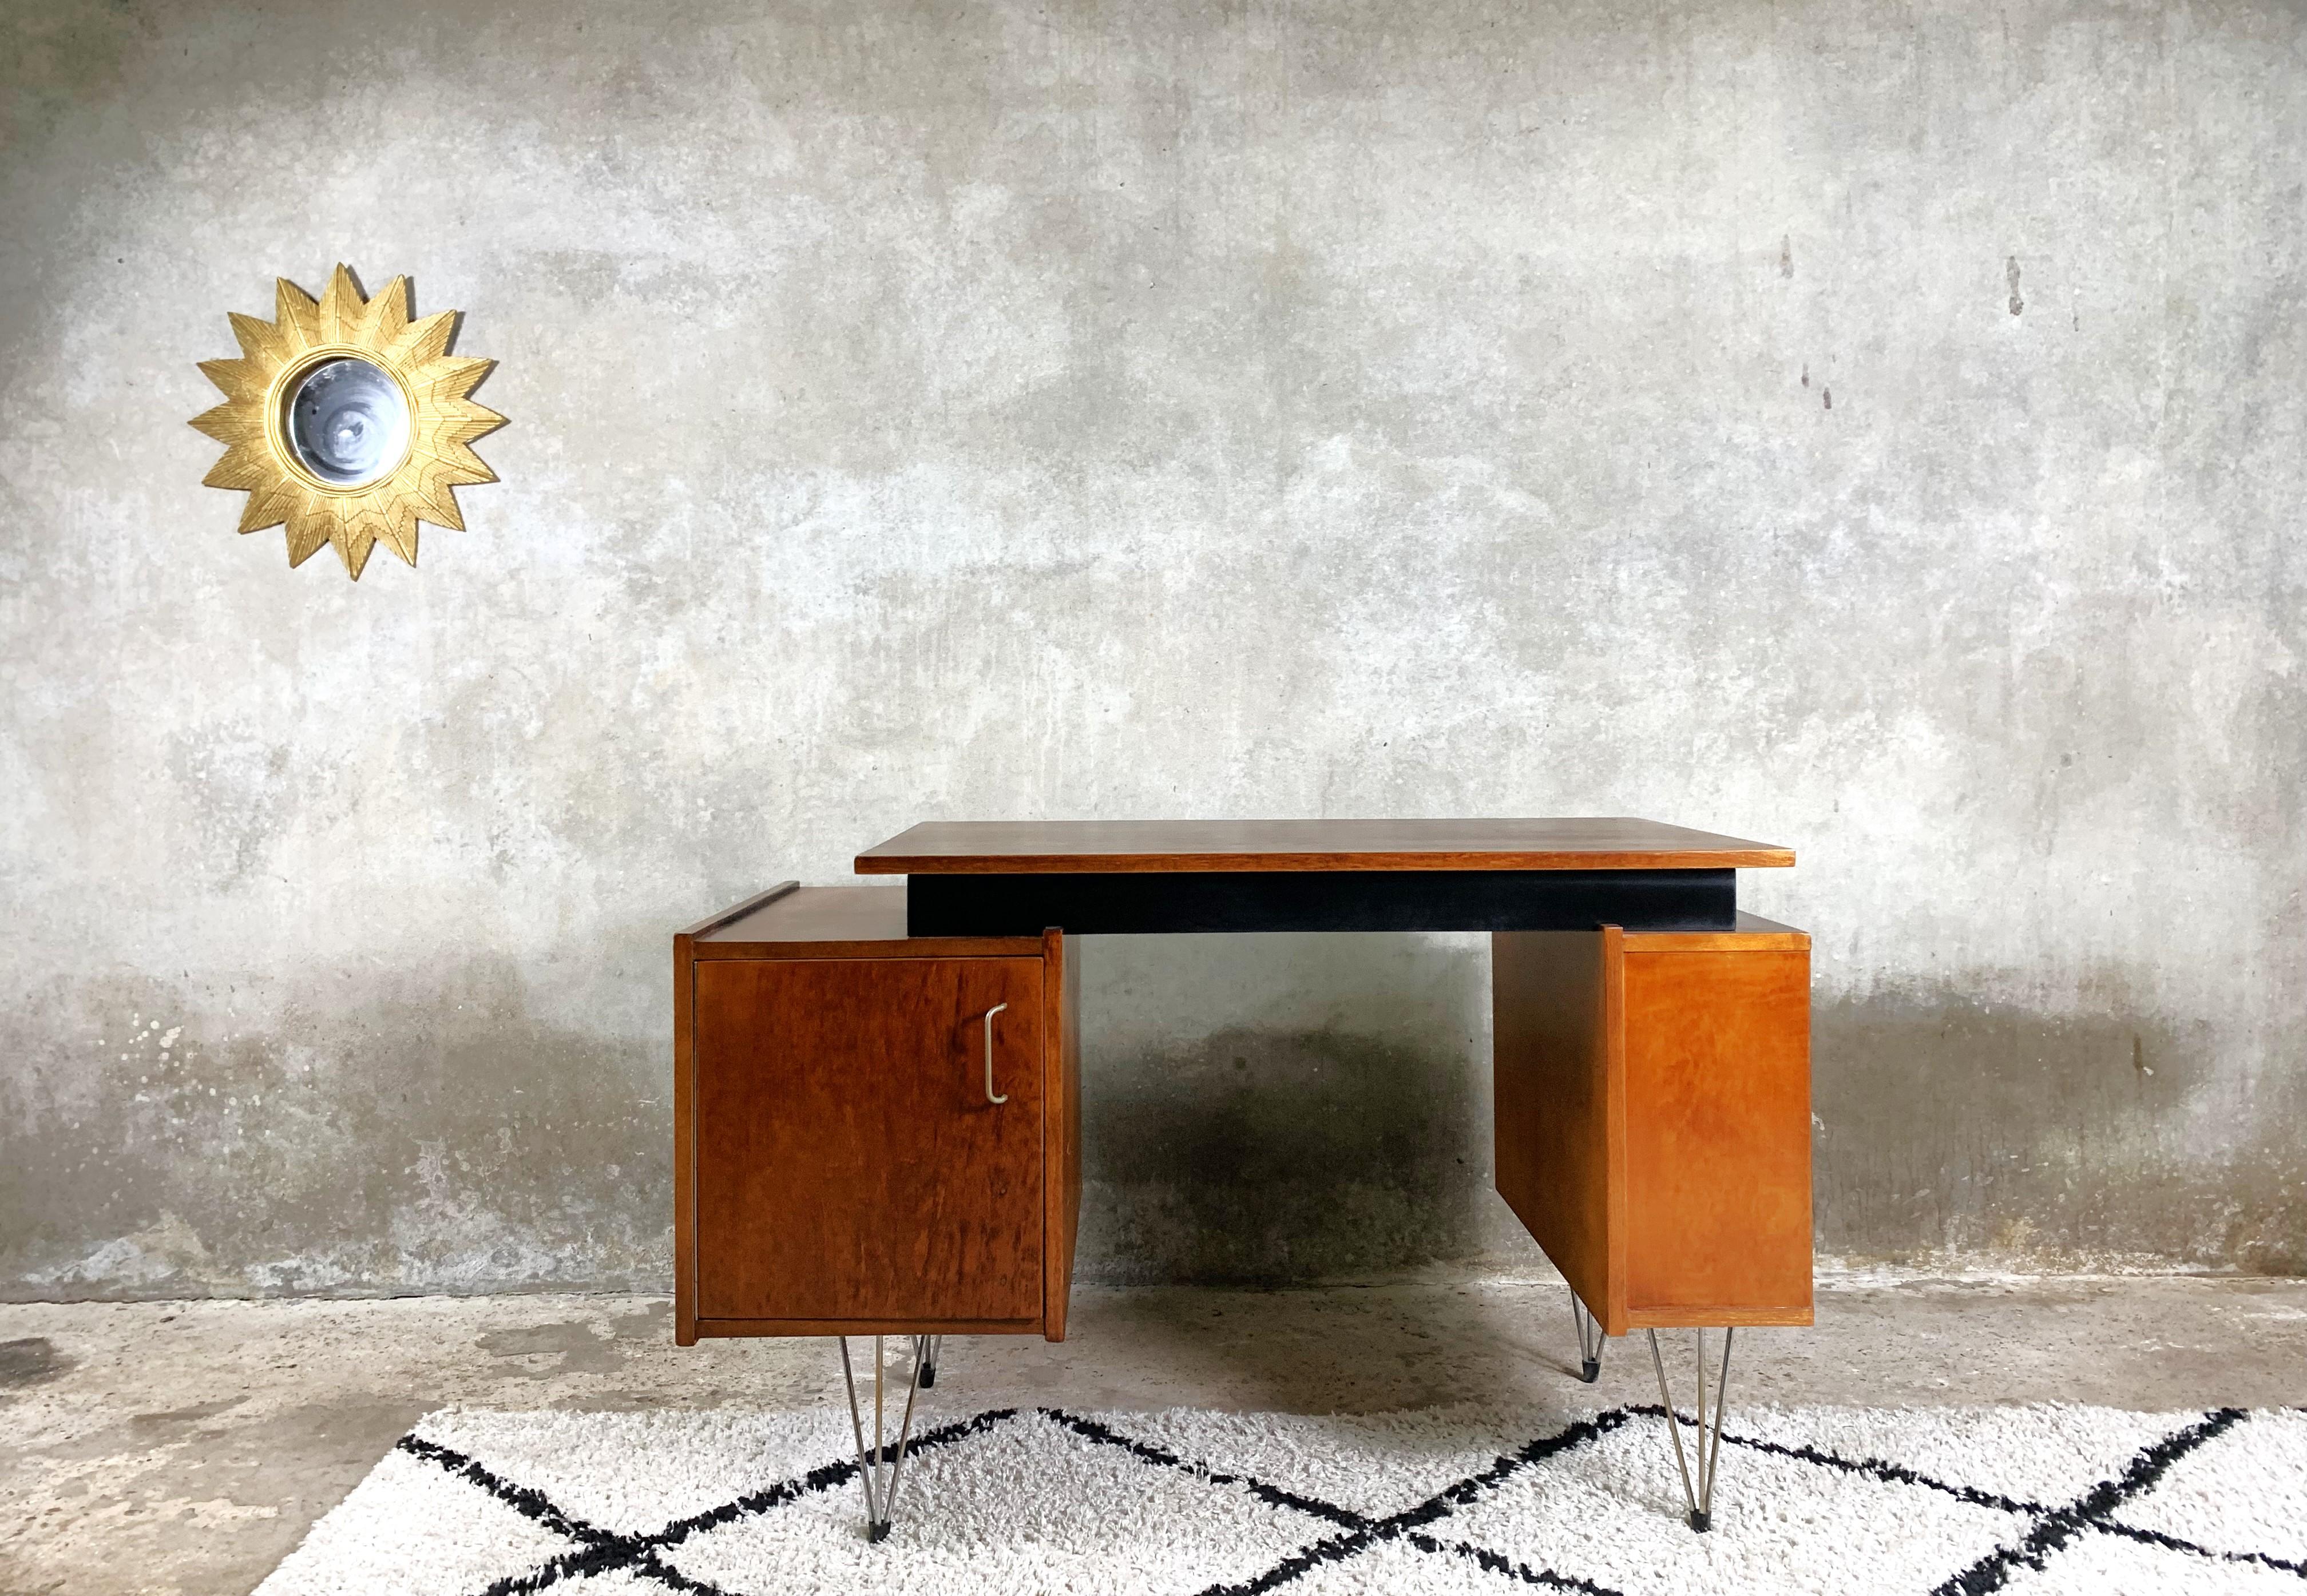 A neat desk designed by Cees Braakman for the Pastoe label. An extremely rare model with two cabinets on metal legs. The desk is veneered, the internal drawers have been renovated. A beautiful example of Dutch mid-century design.